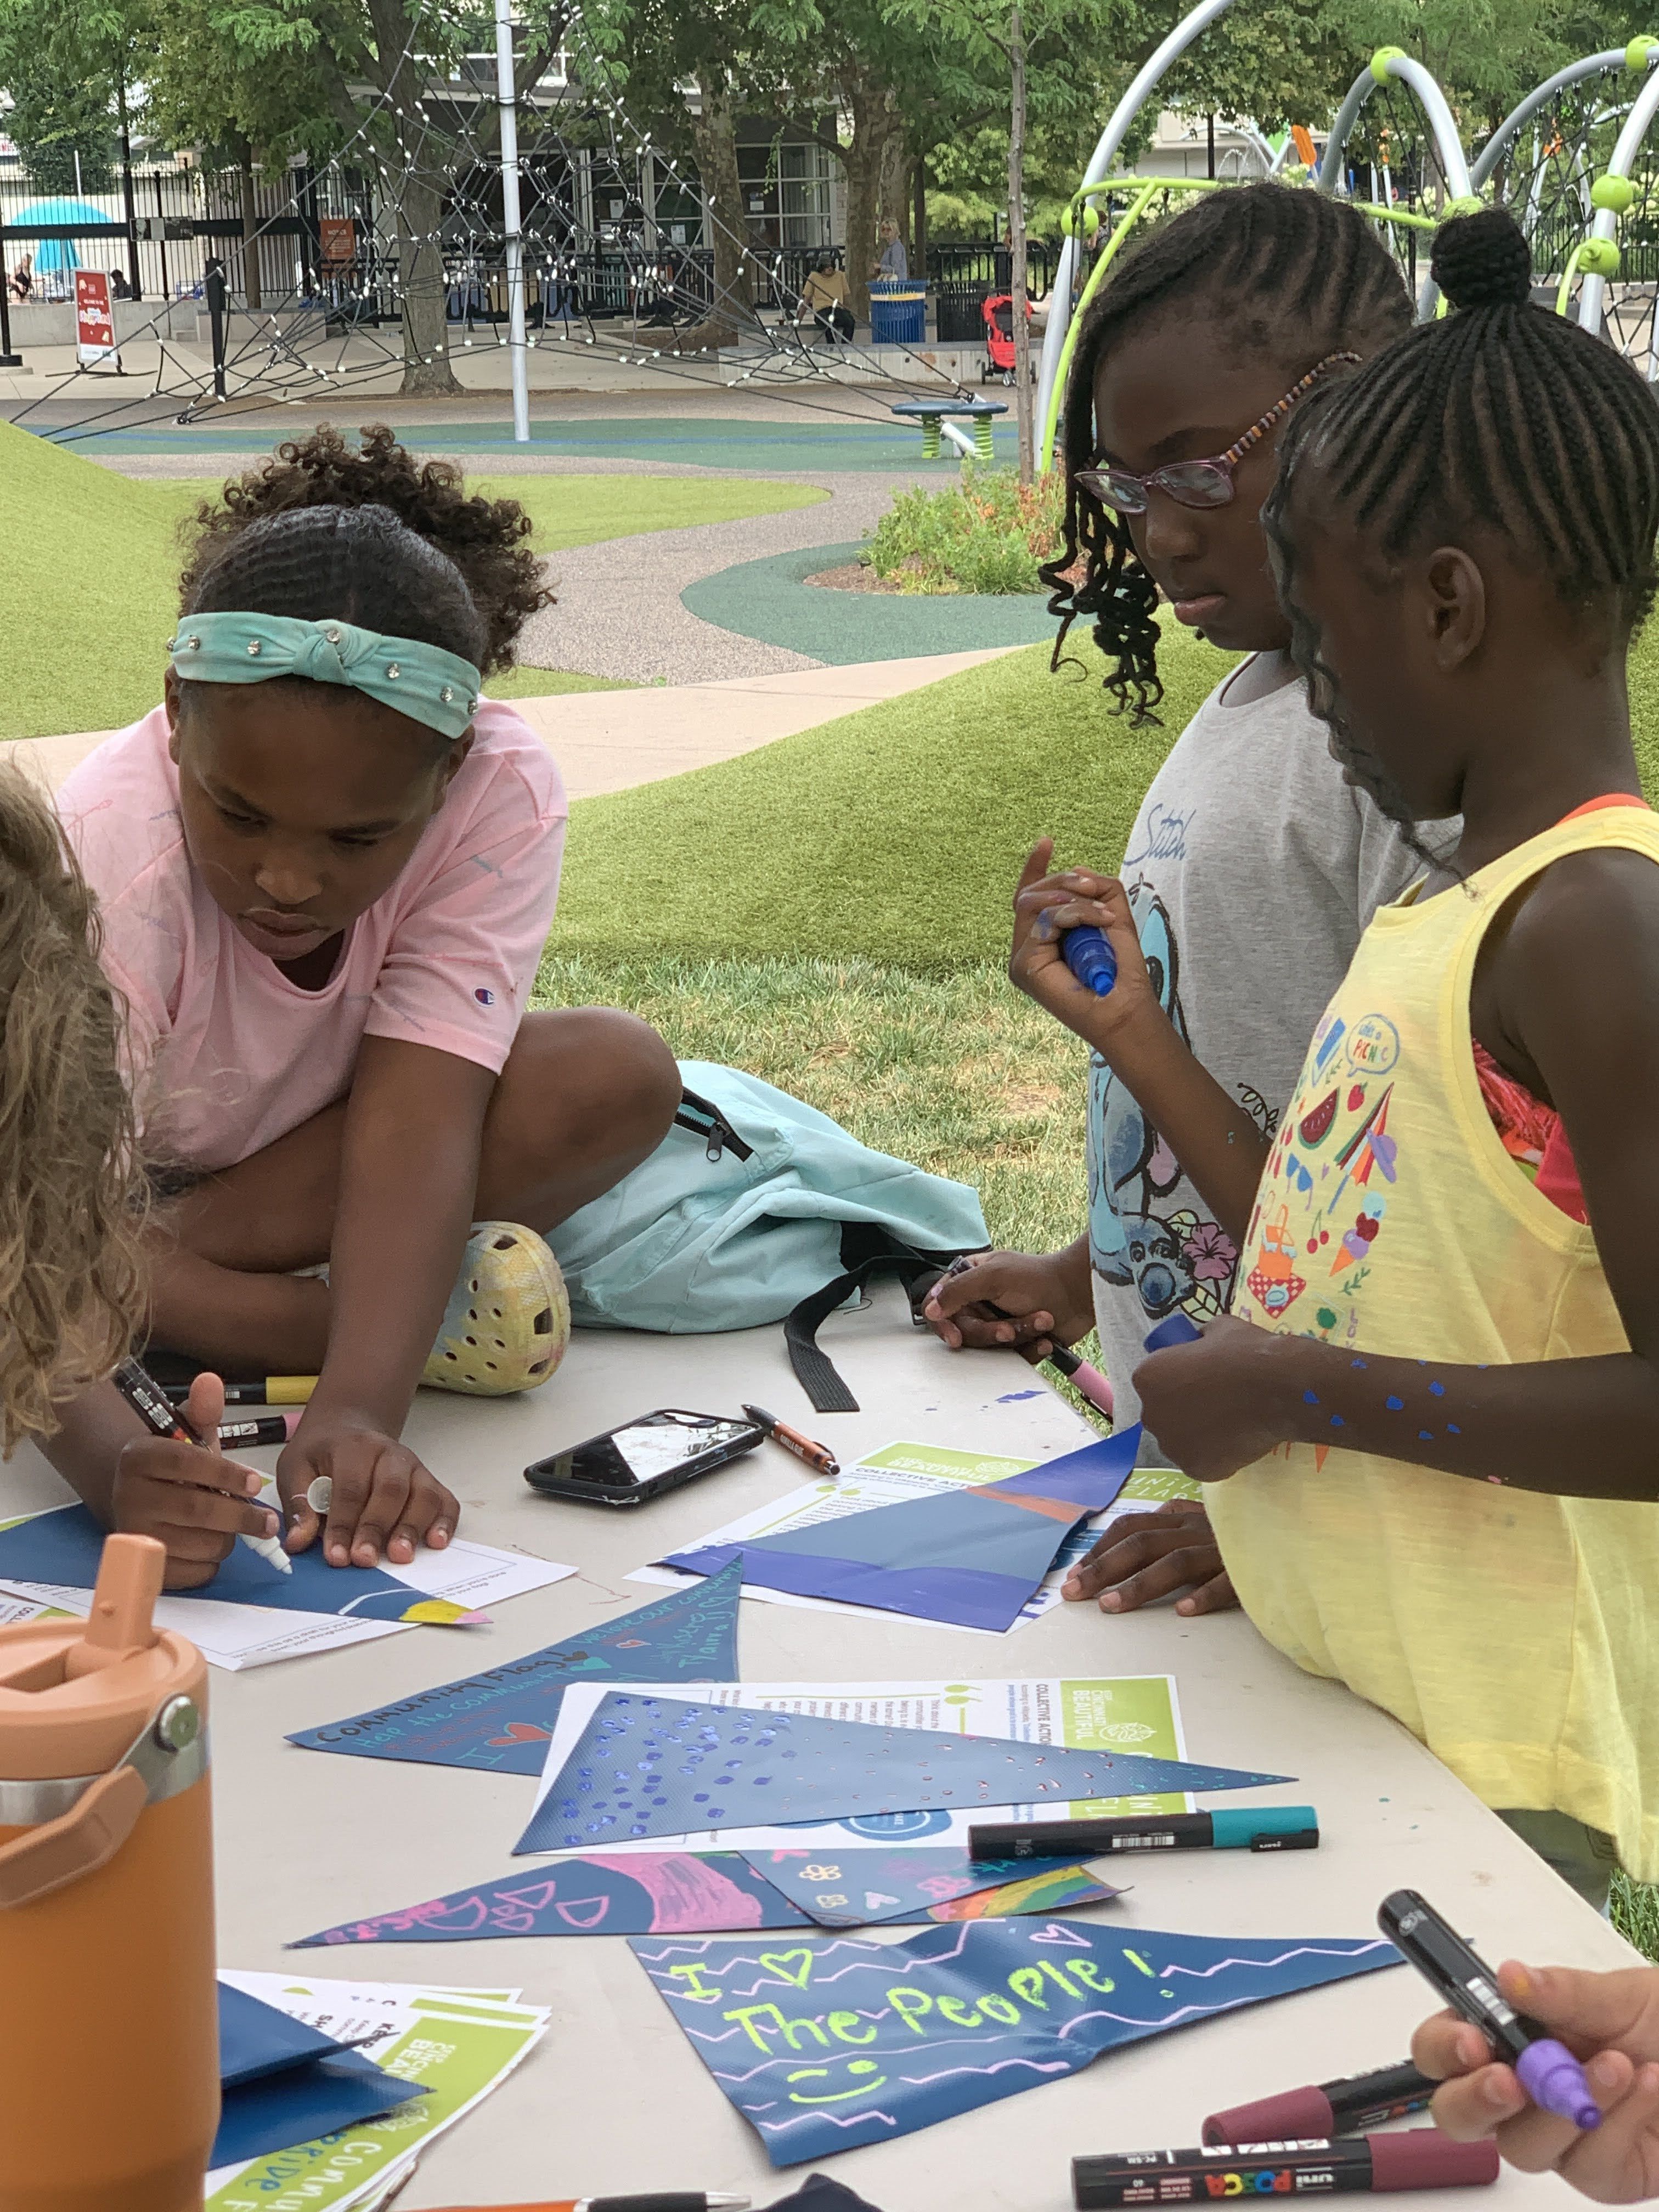 Three children talking and drawing on Community Pride Flags